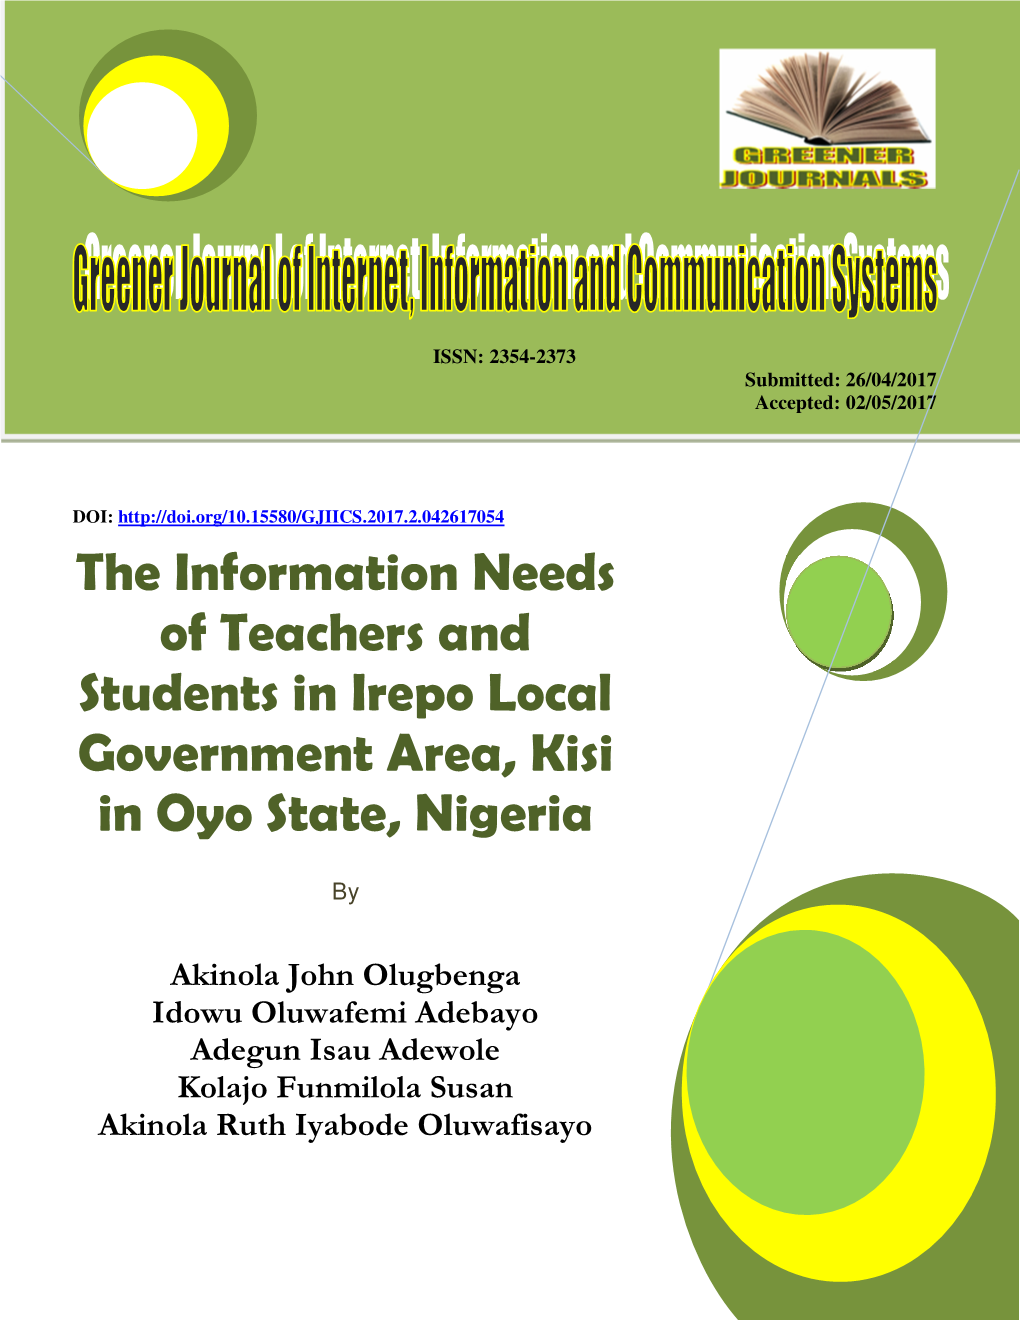 The Information Needs of Teachers and Students in Irepo Local Government Area, Kisi in Oyo State, Nigeria